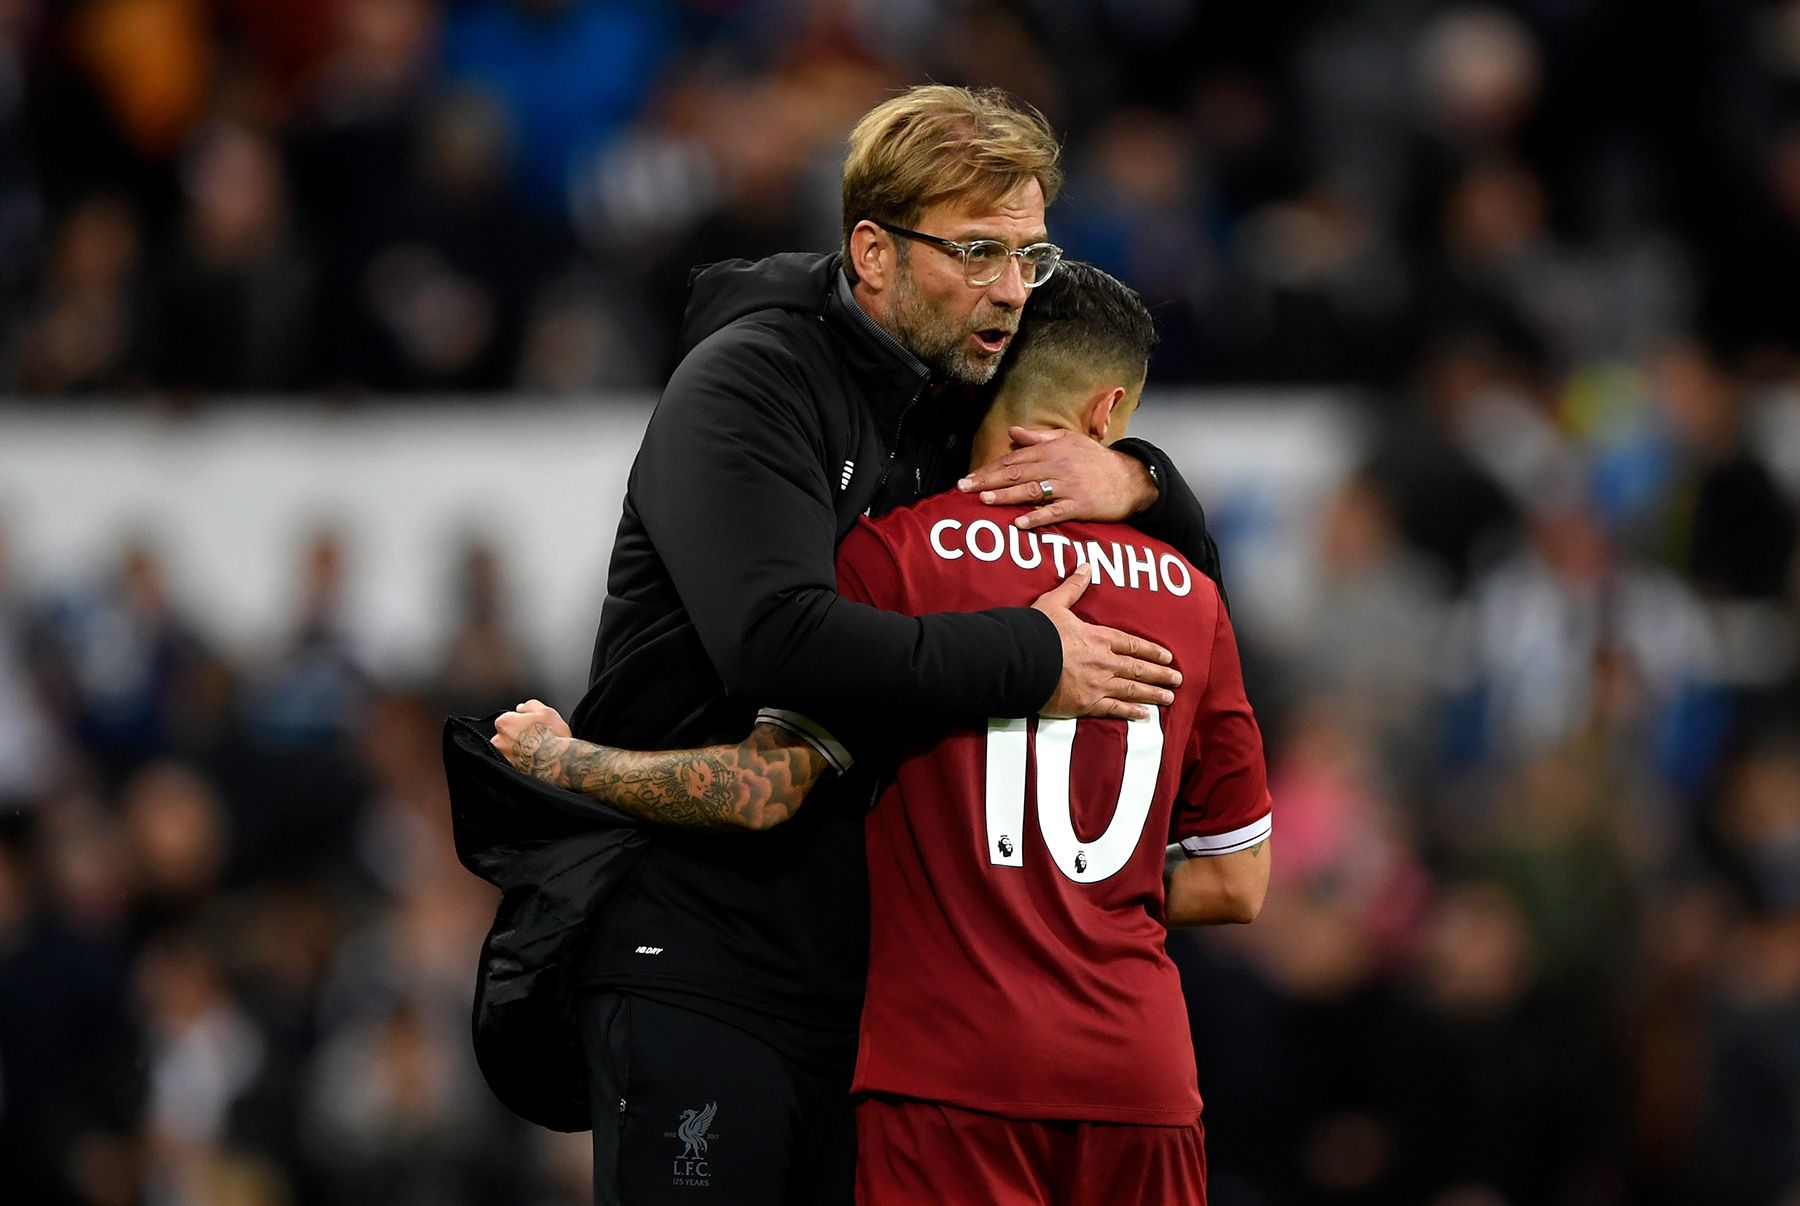 Klopp and Coutinho hug in Liverpool